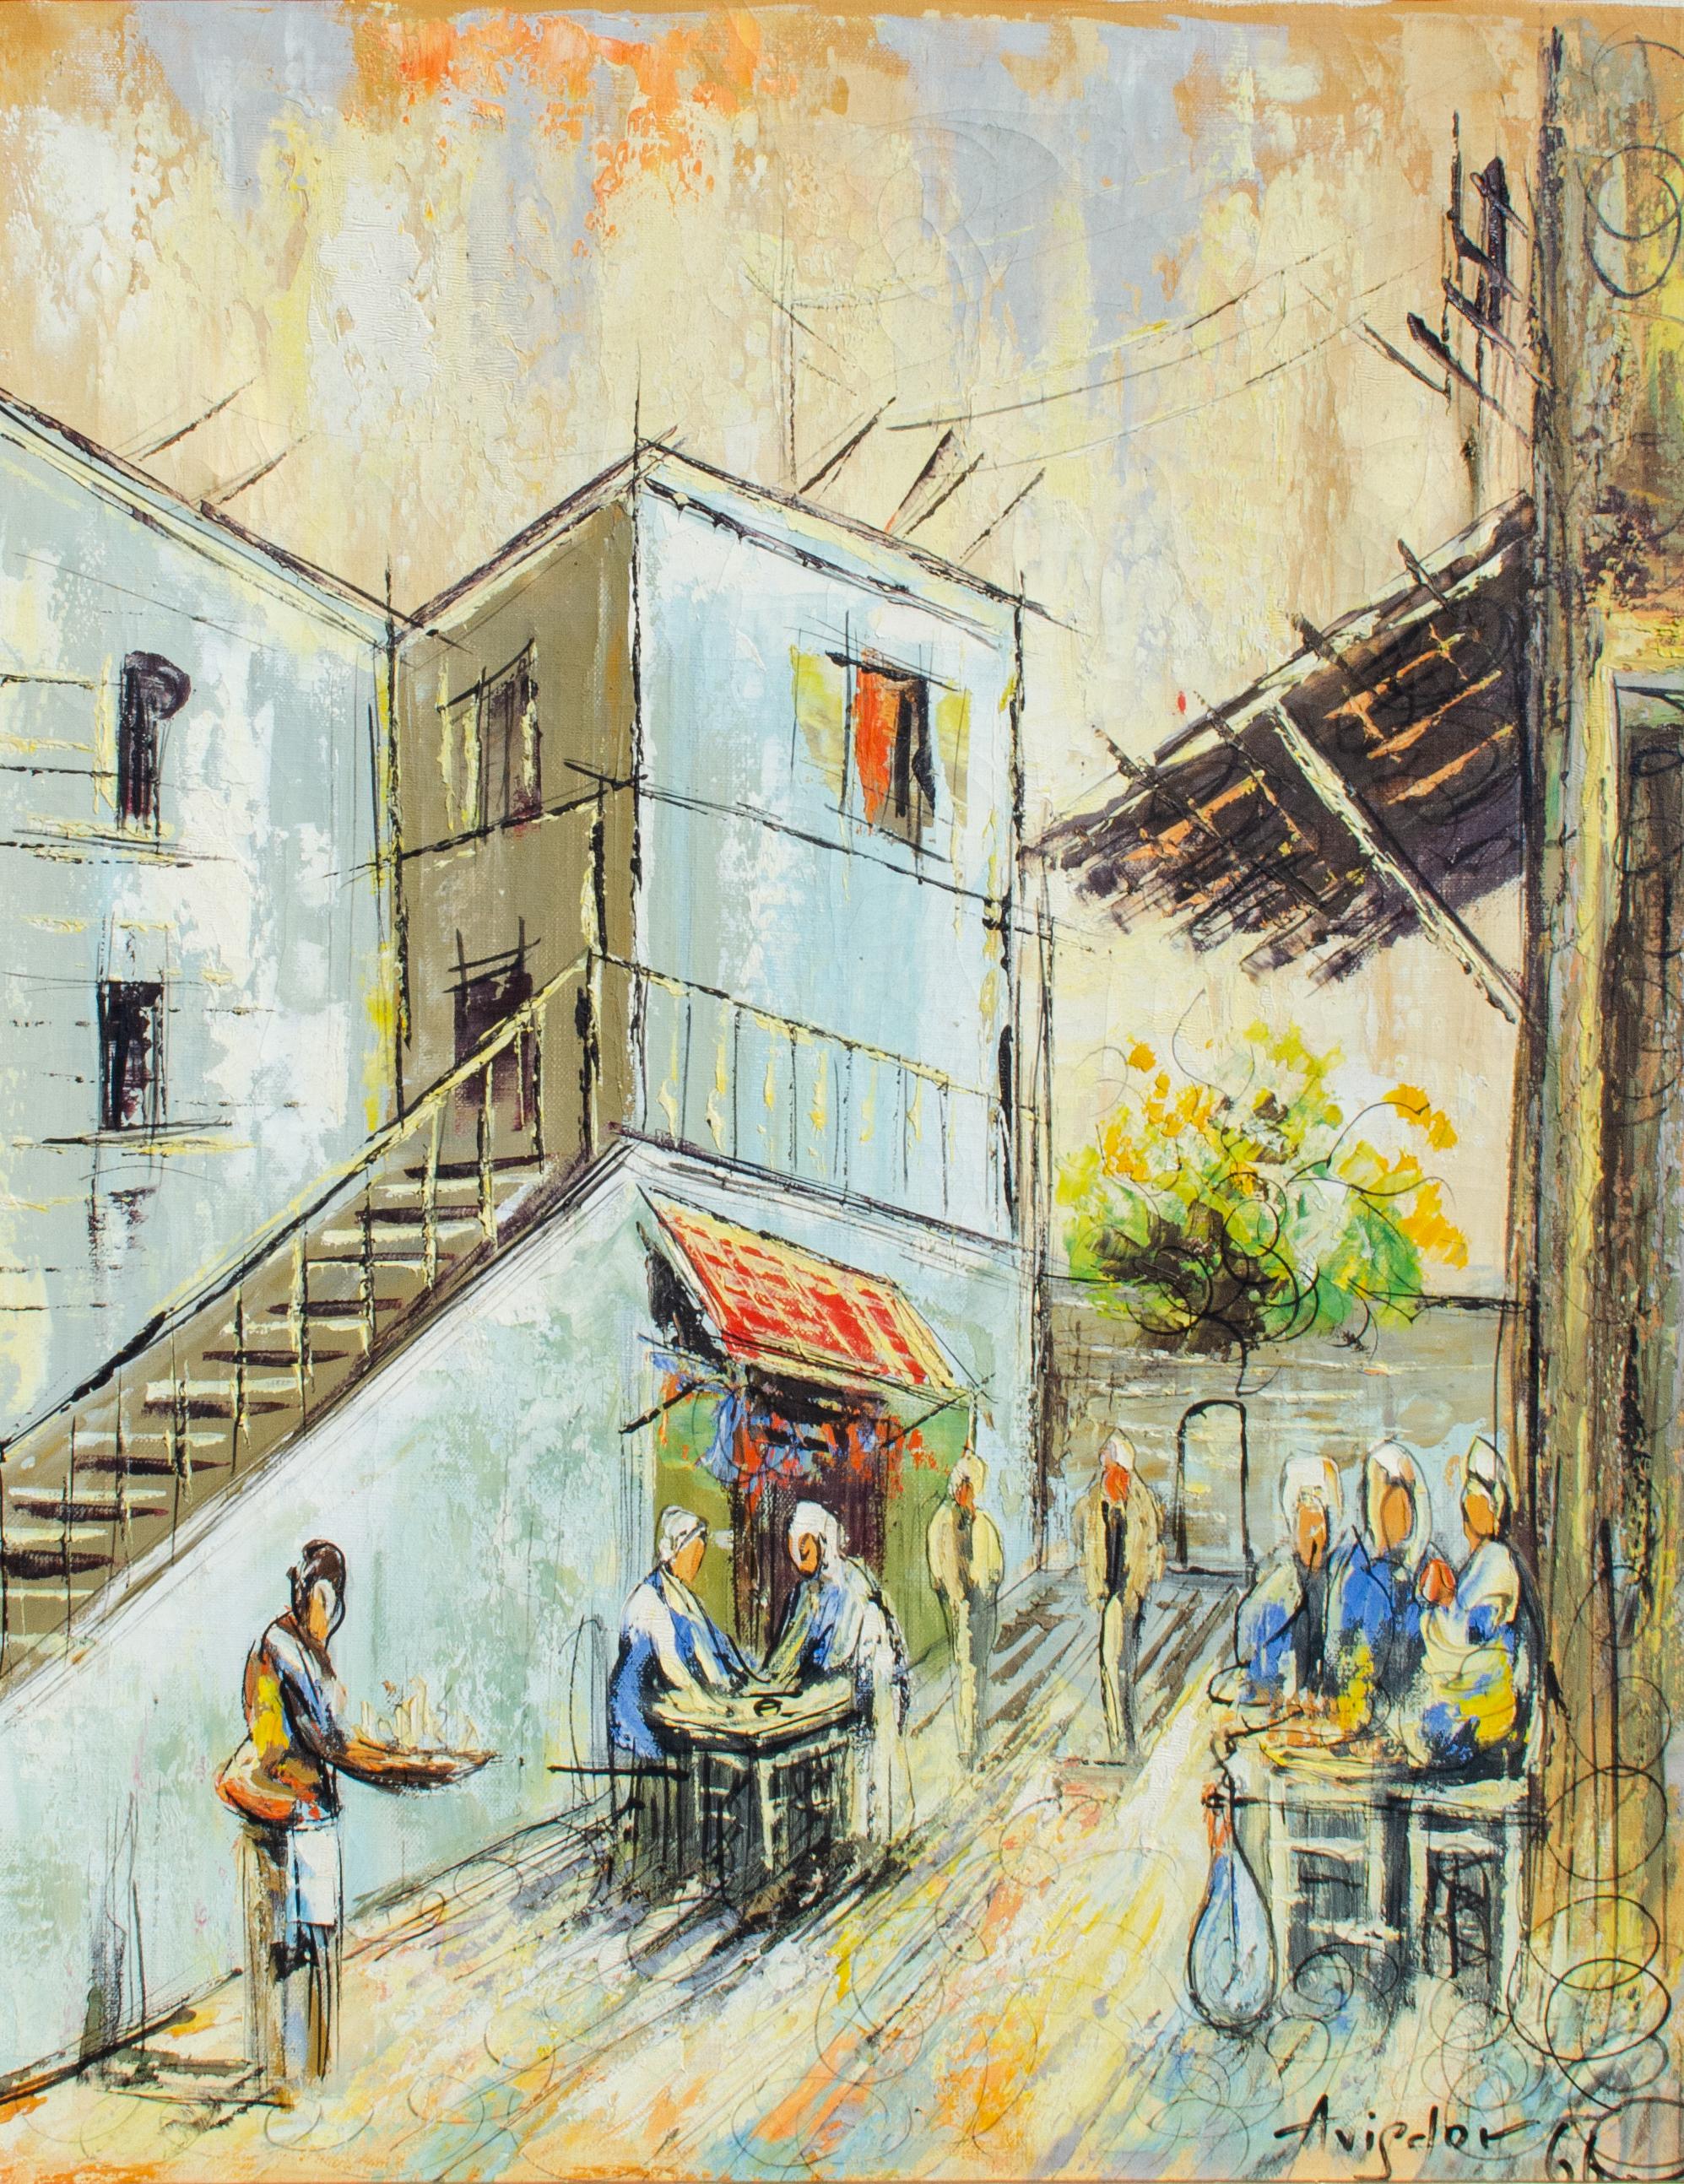 1966 North African Street Scene by Mystery Artist - Painting by Unknown